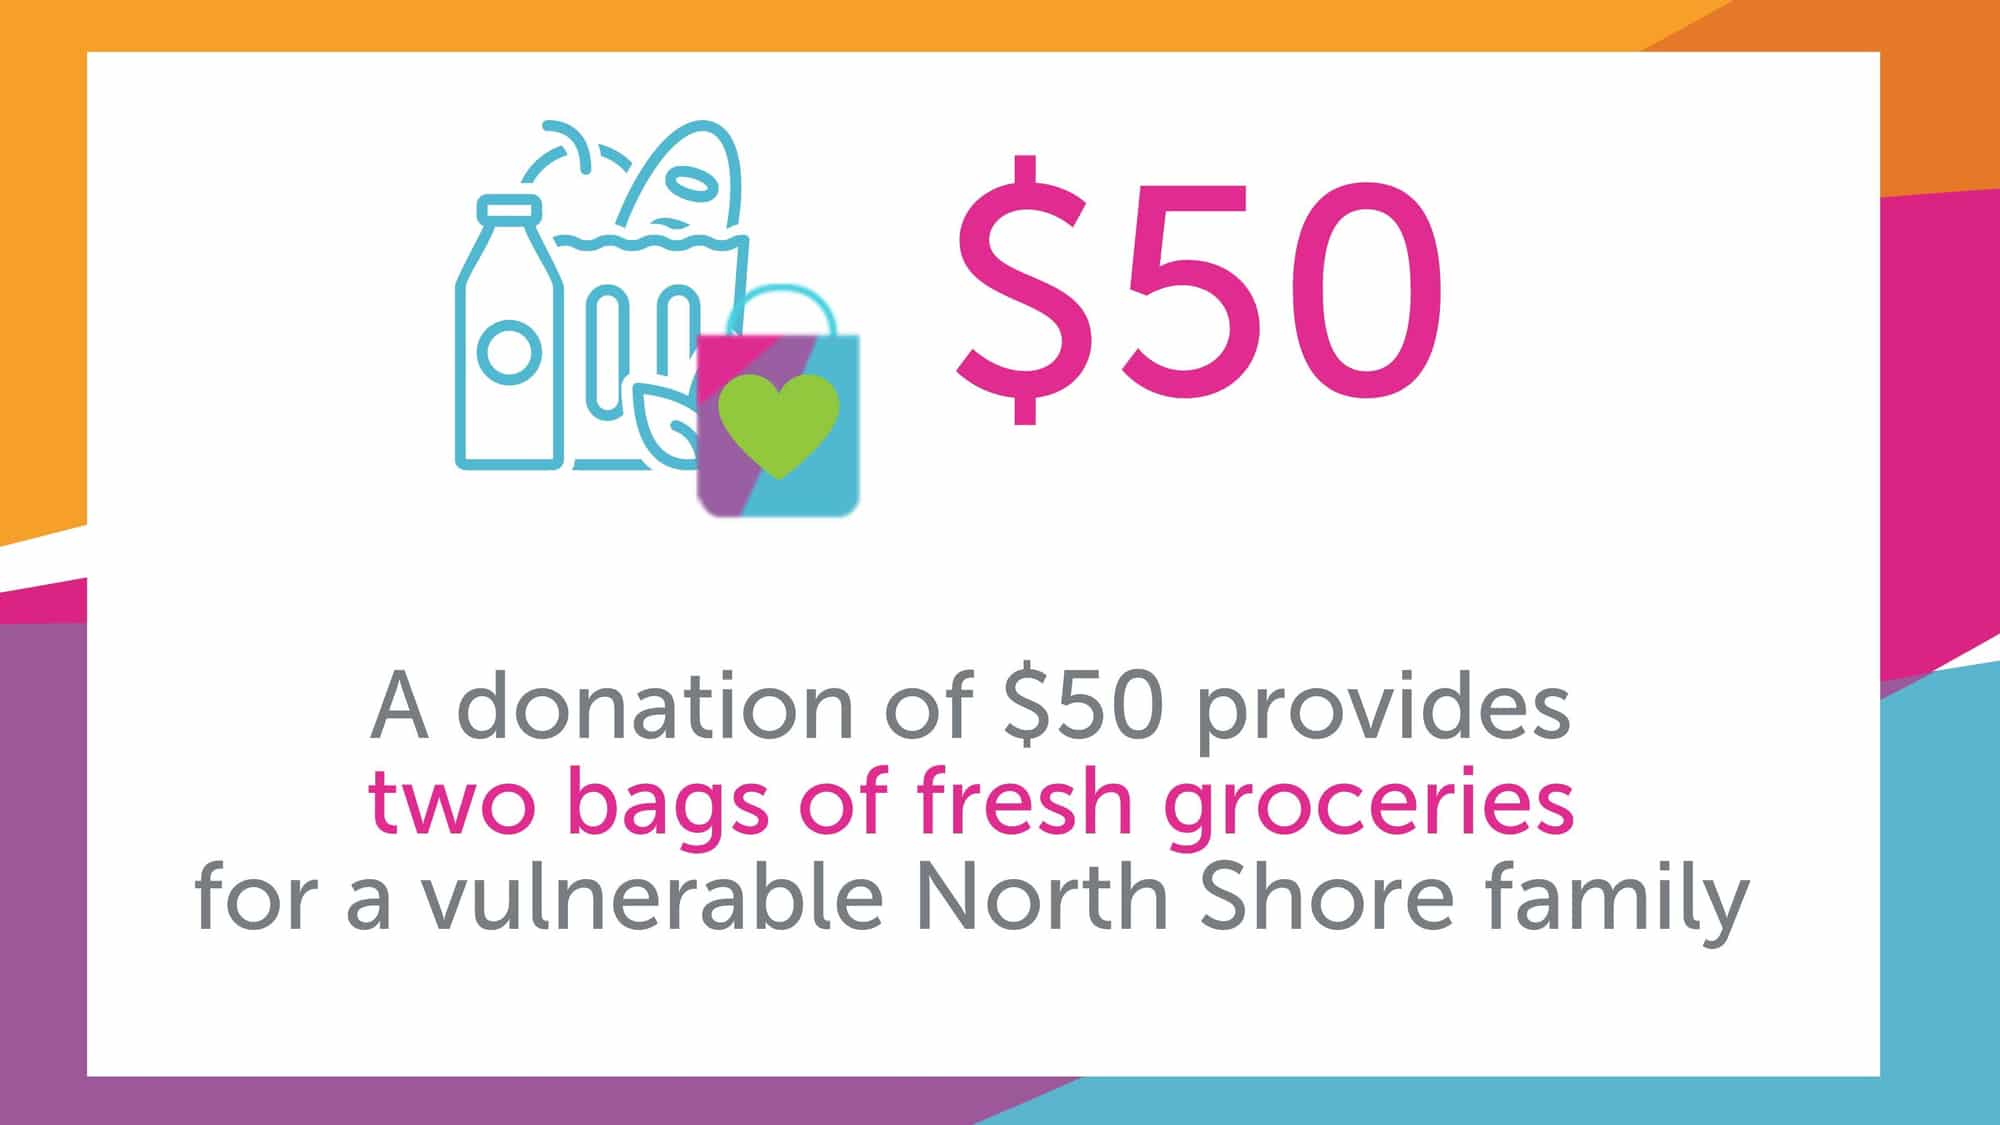 #4 Provide groceries to vulnerable families supporting image.